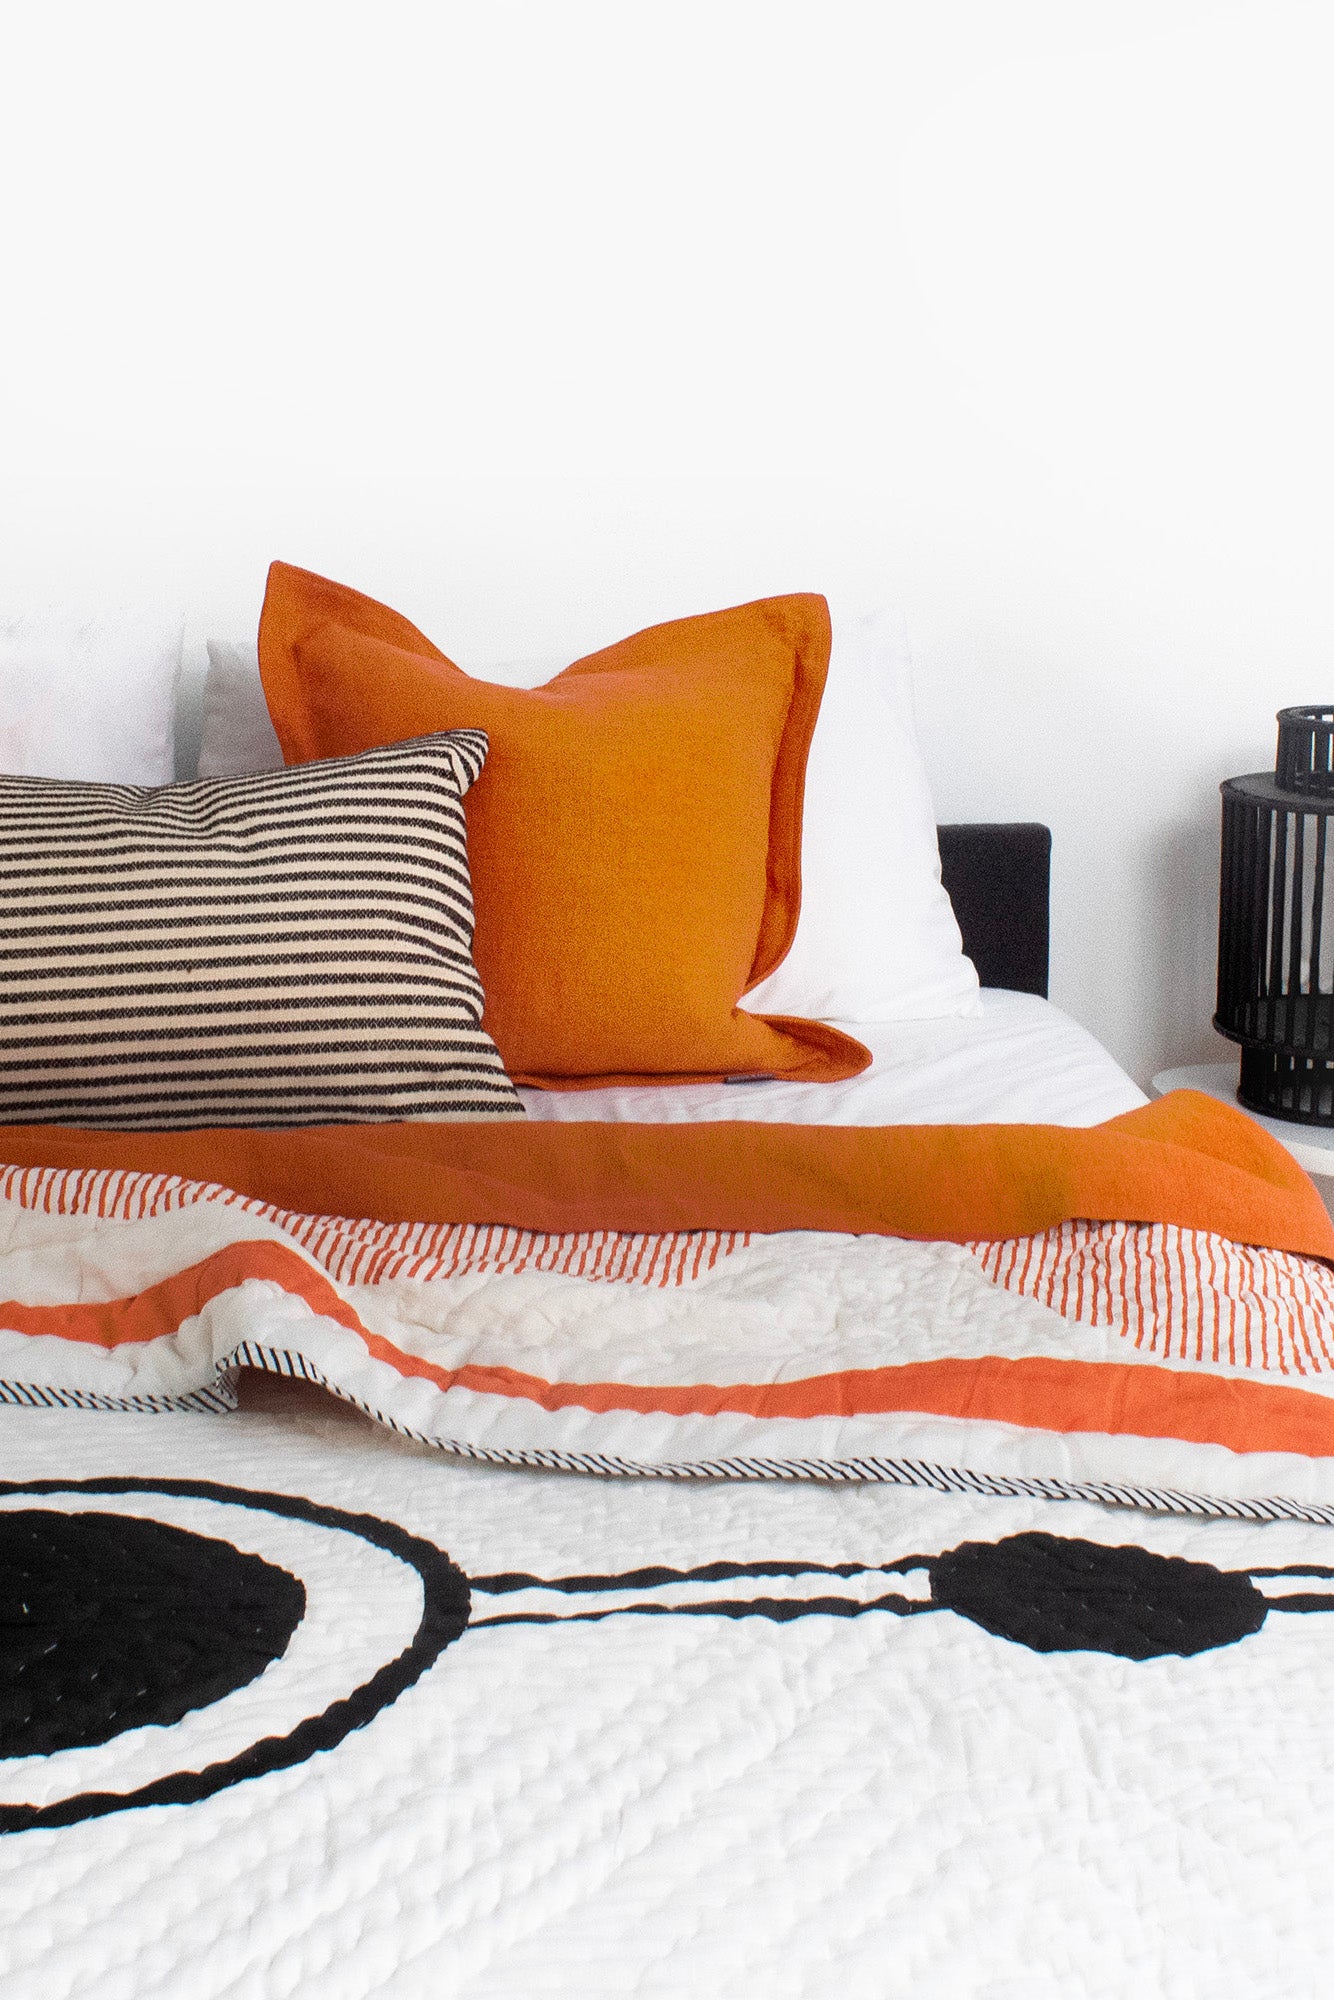 No 1 Block Printed Black, White and Orange Geometric Quilted King Size Bedspread - Biggs & Hill - Bedspread - Bedspread - black - blanket